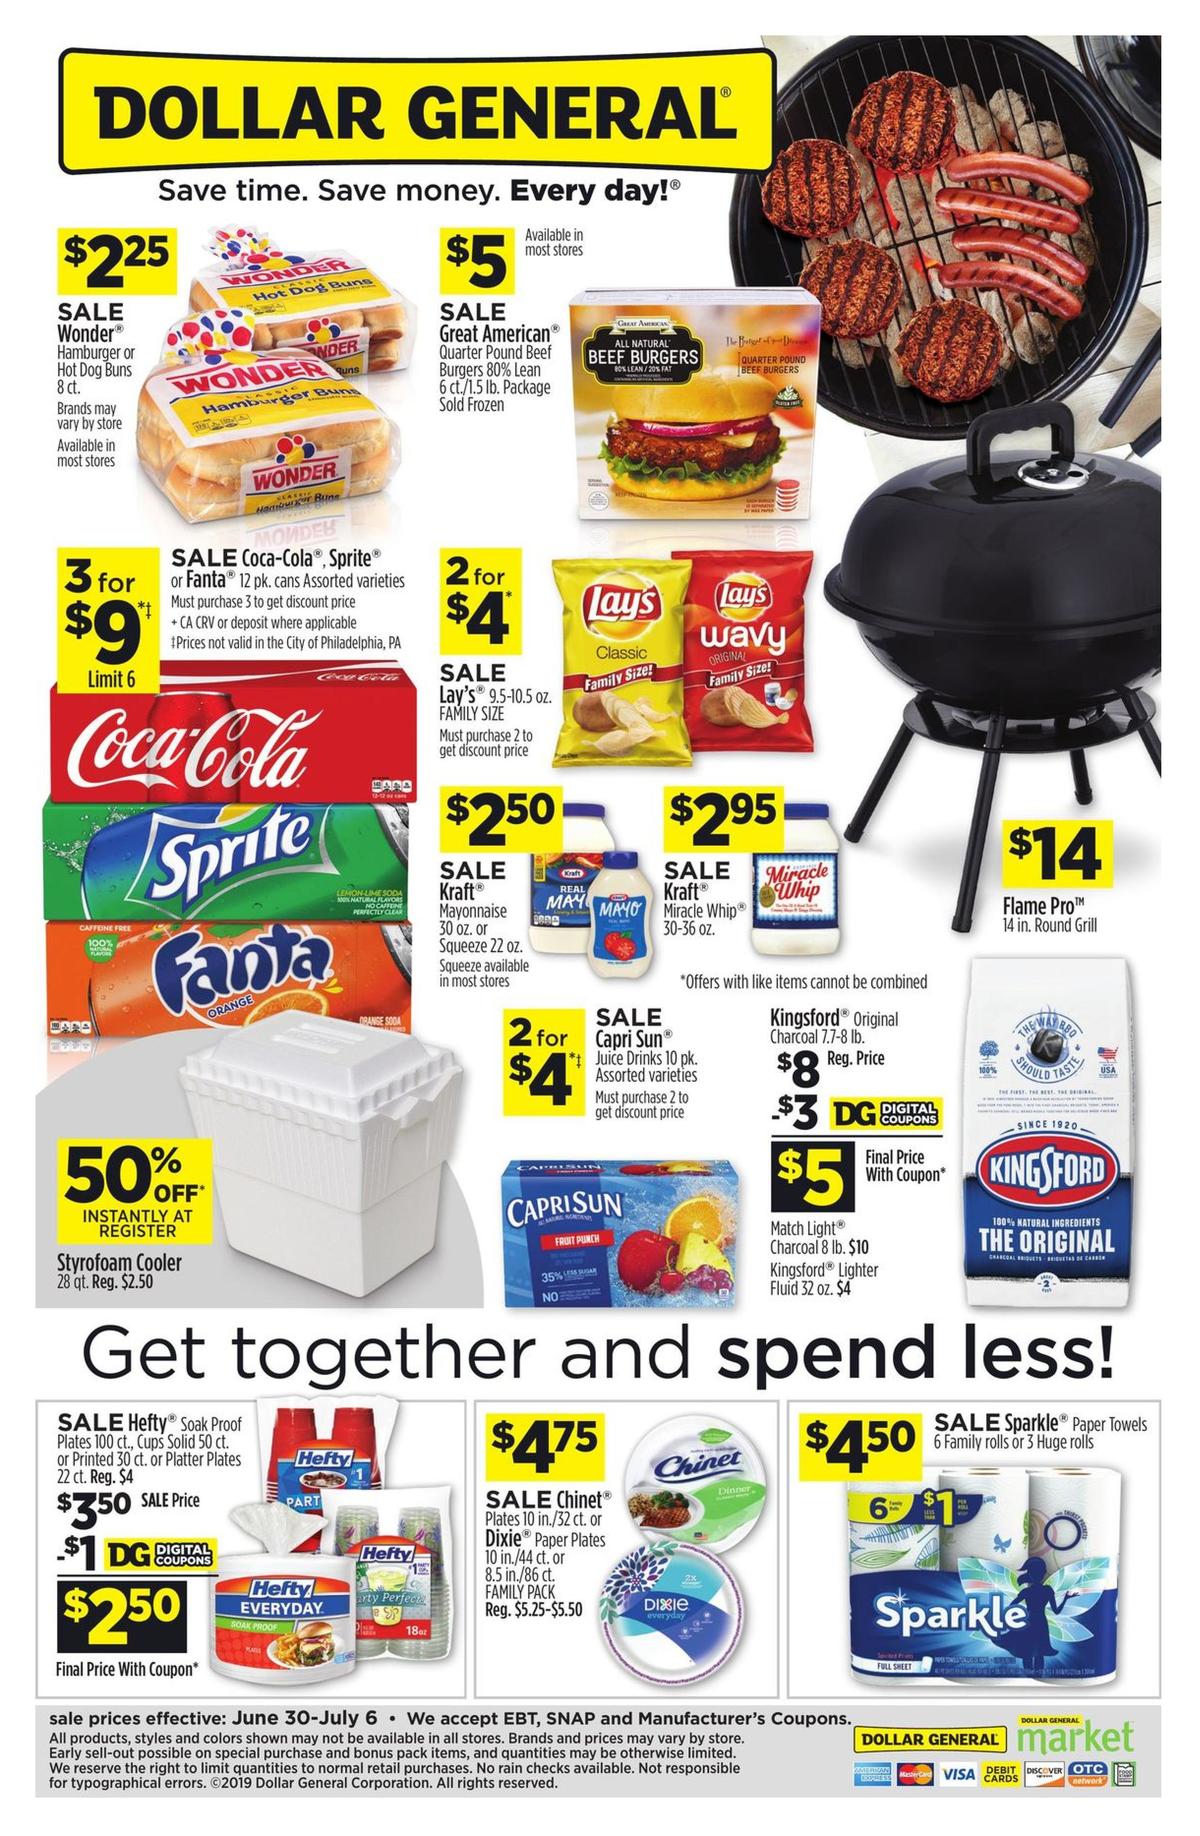 Dollar General Save More on Summer Essentials! Weekly Ad from June 30